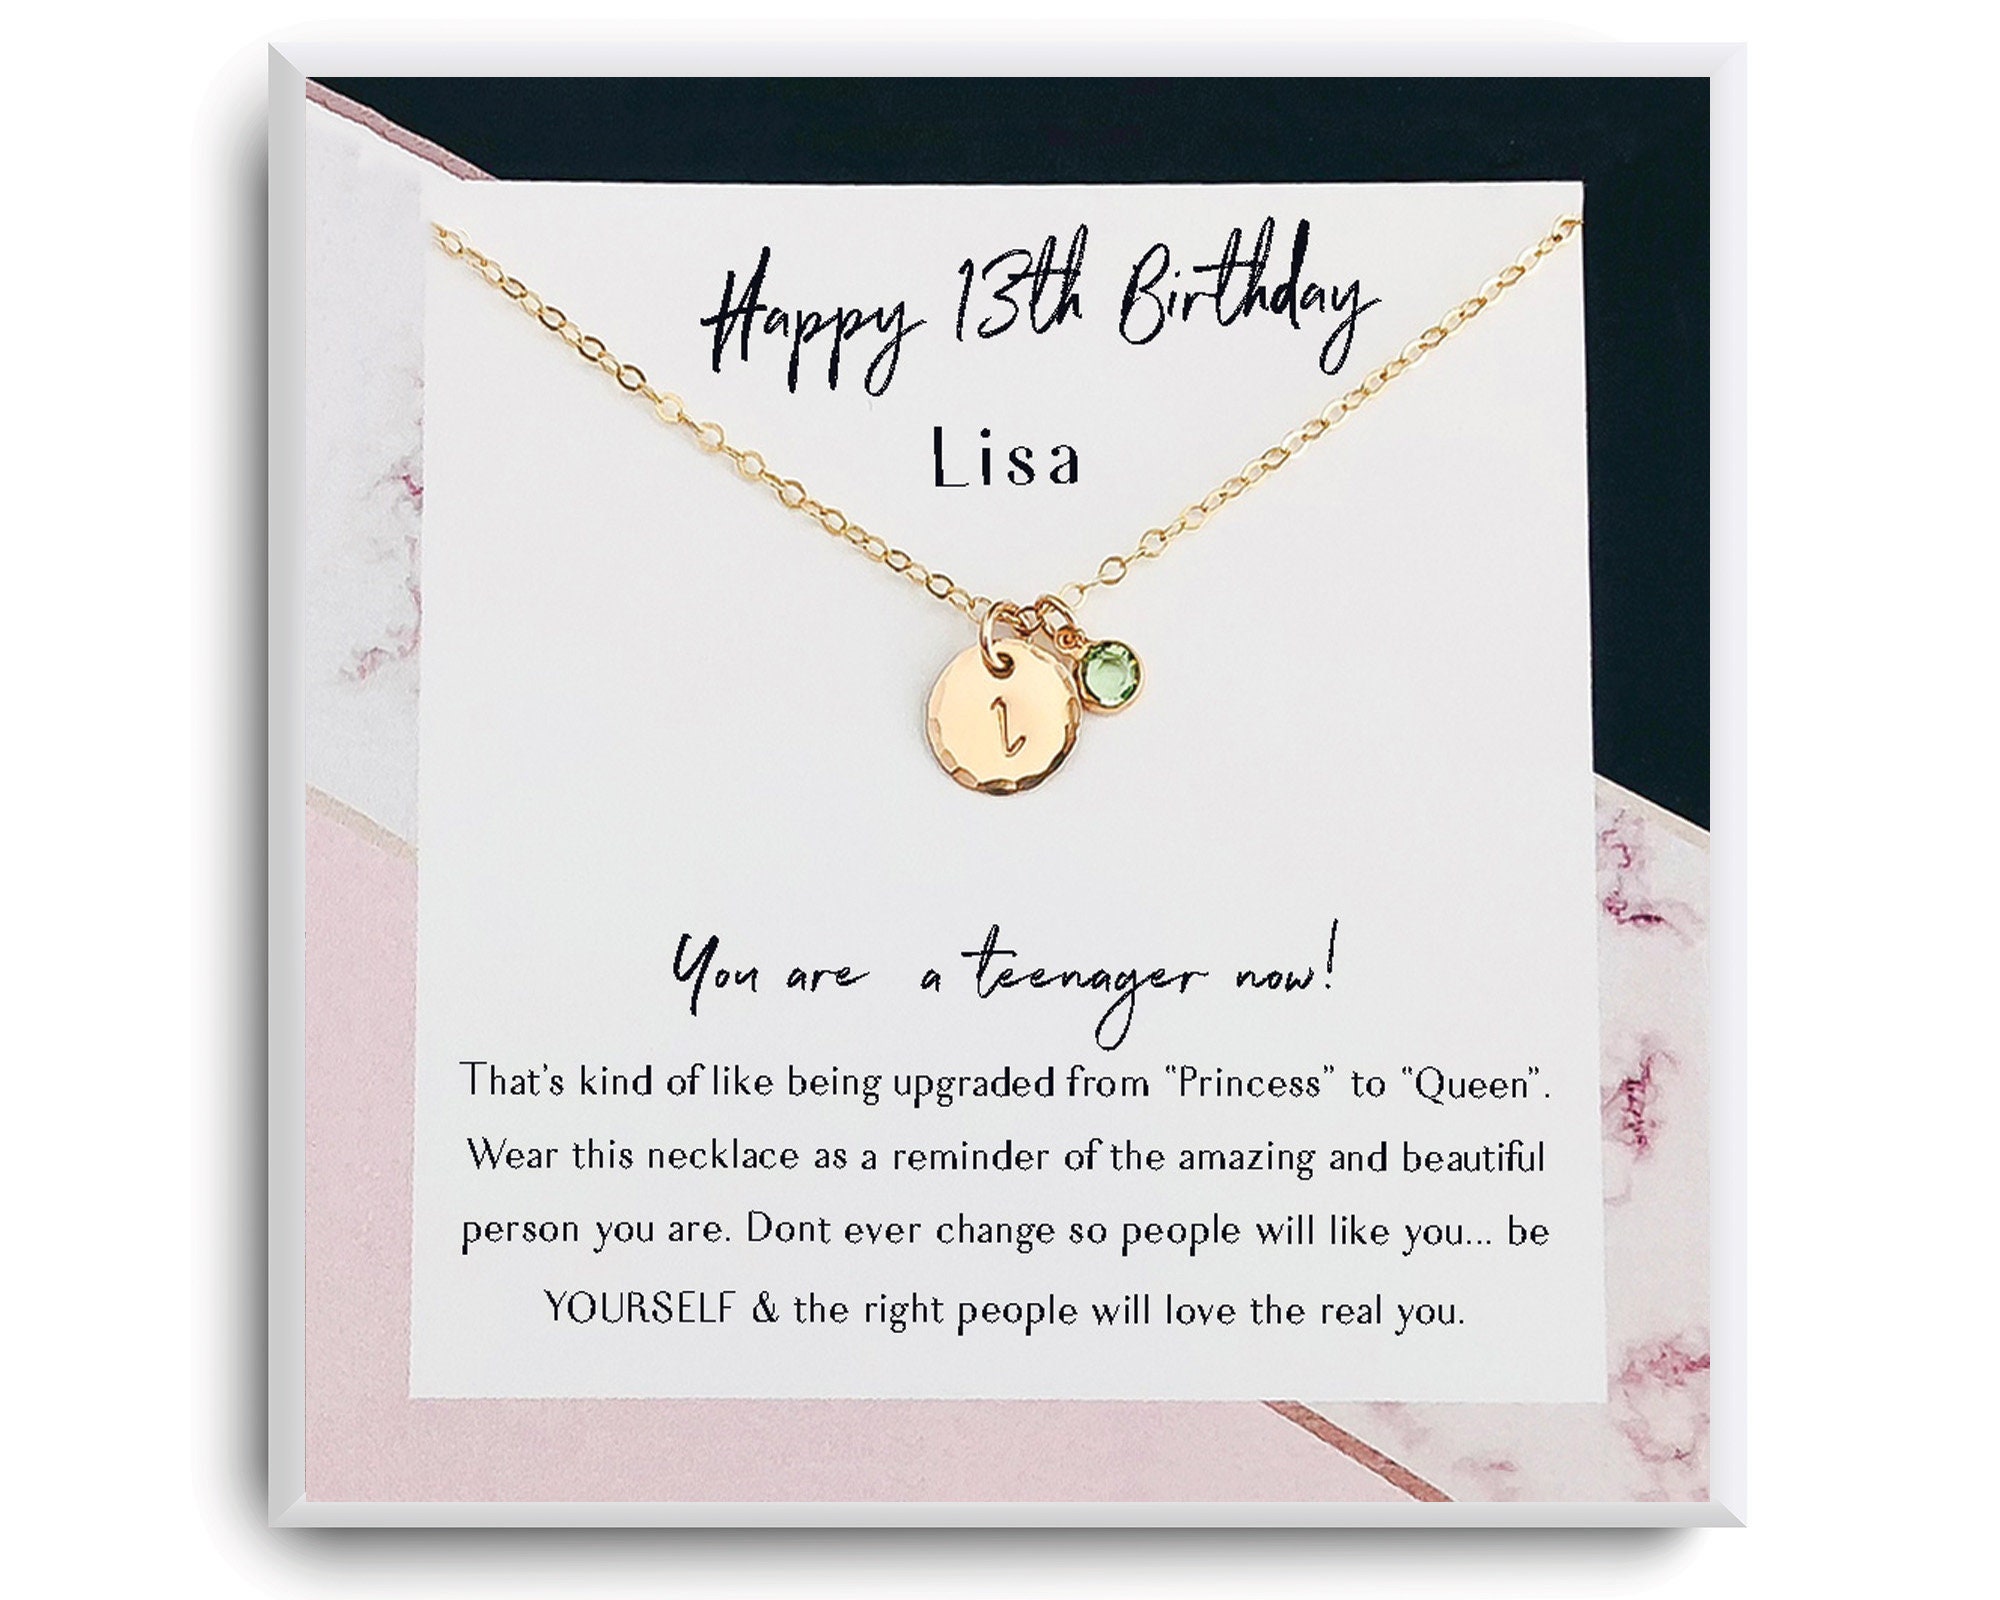 14 Year Old Gifts: 30 Great Gift Ideas for 14th Birthdays & Holidays » All  Gifts Considered